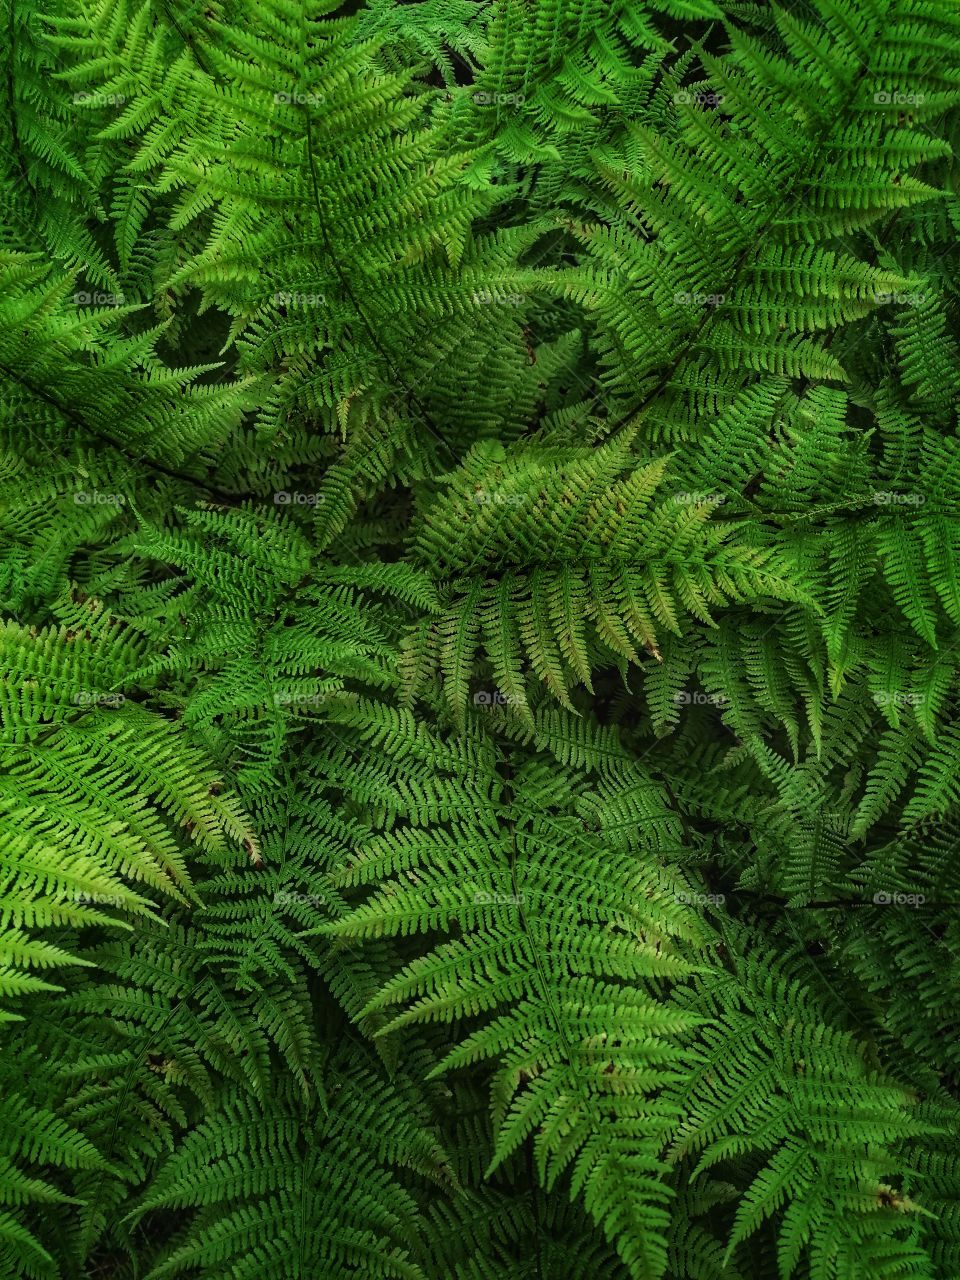 The magnificent leaves of Fern.